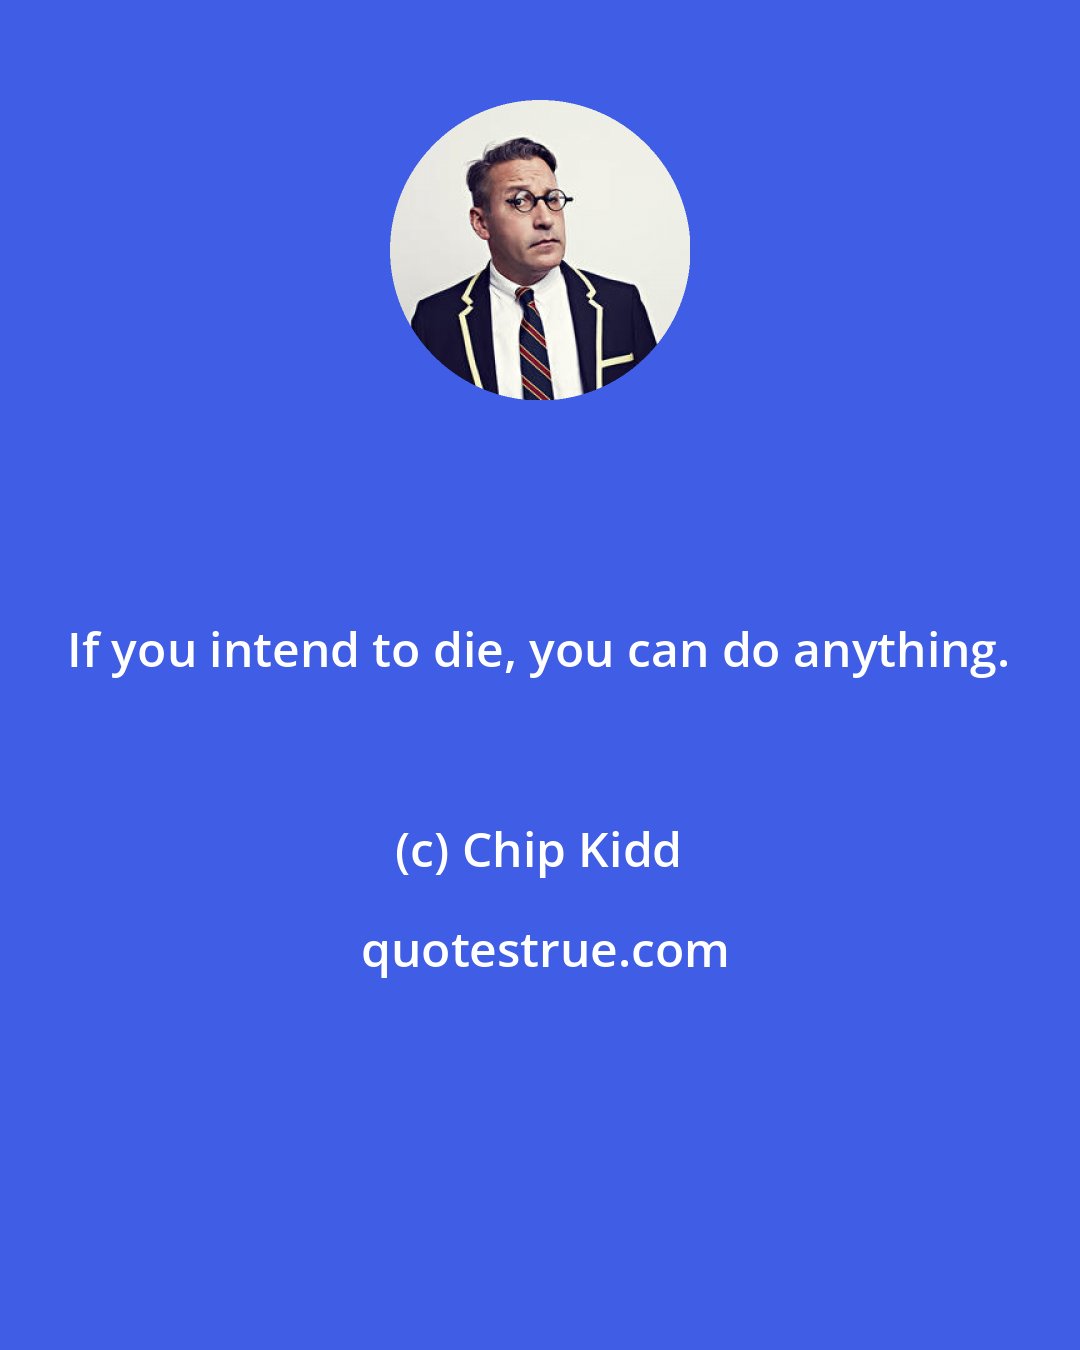 Chip Kidd: If you intend to die, you can do anything.